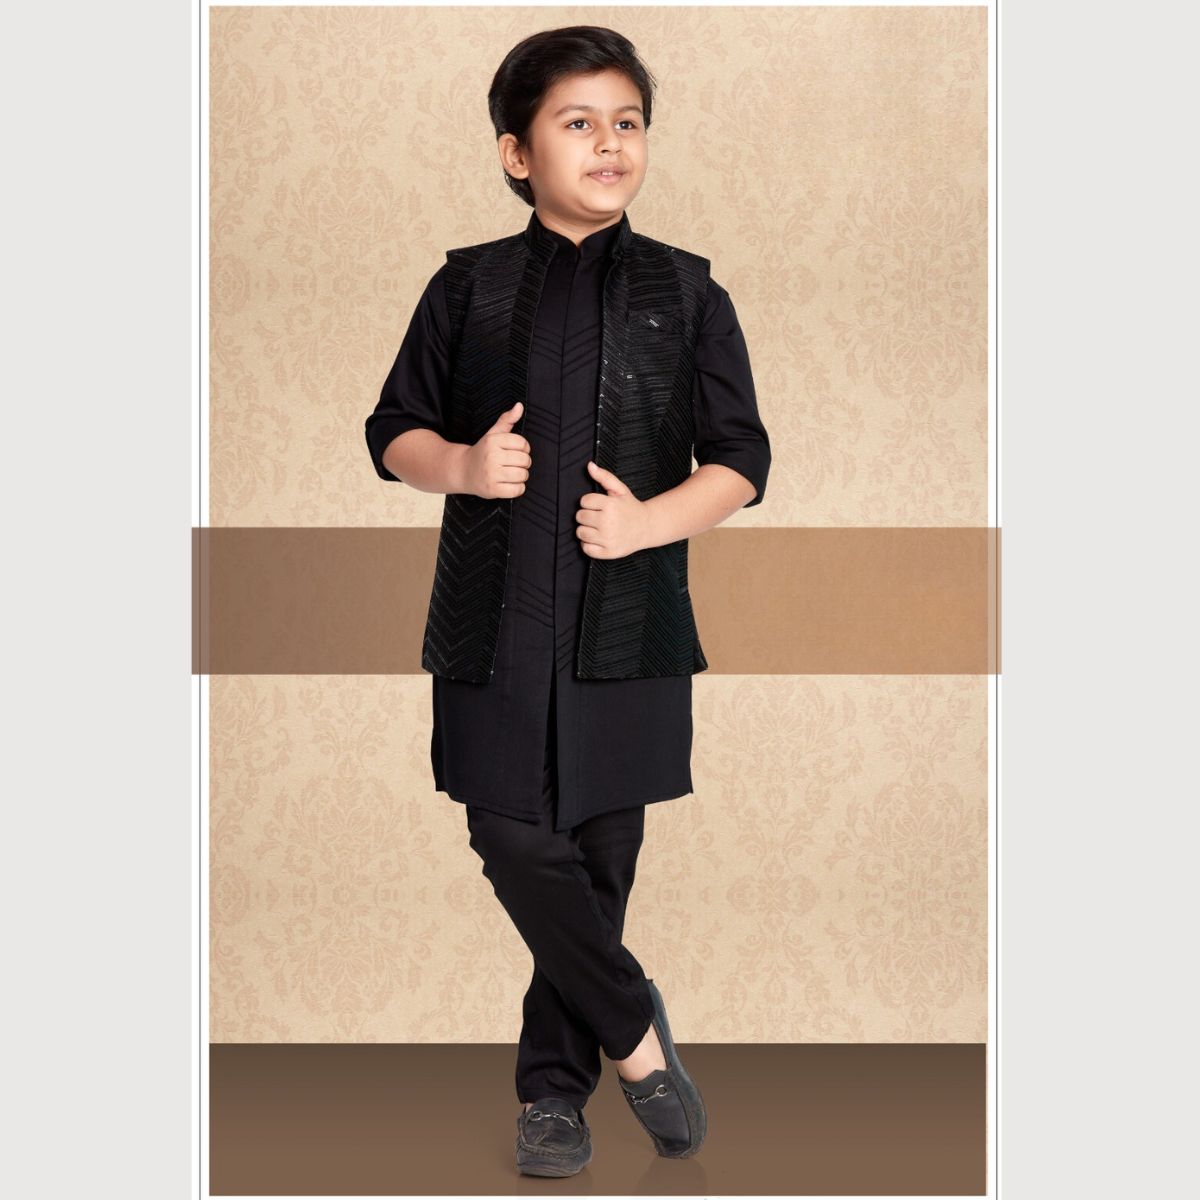 Amazon.com: Nwada Boys Suit Toddler Dress Clothes Shirt with Bow Tie, Dress  Pants Sets Kids Gentleman Outfit Suits Black: Clothing, Shoes & Jewelry